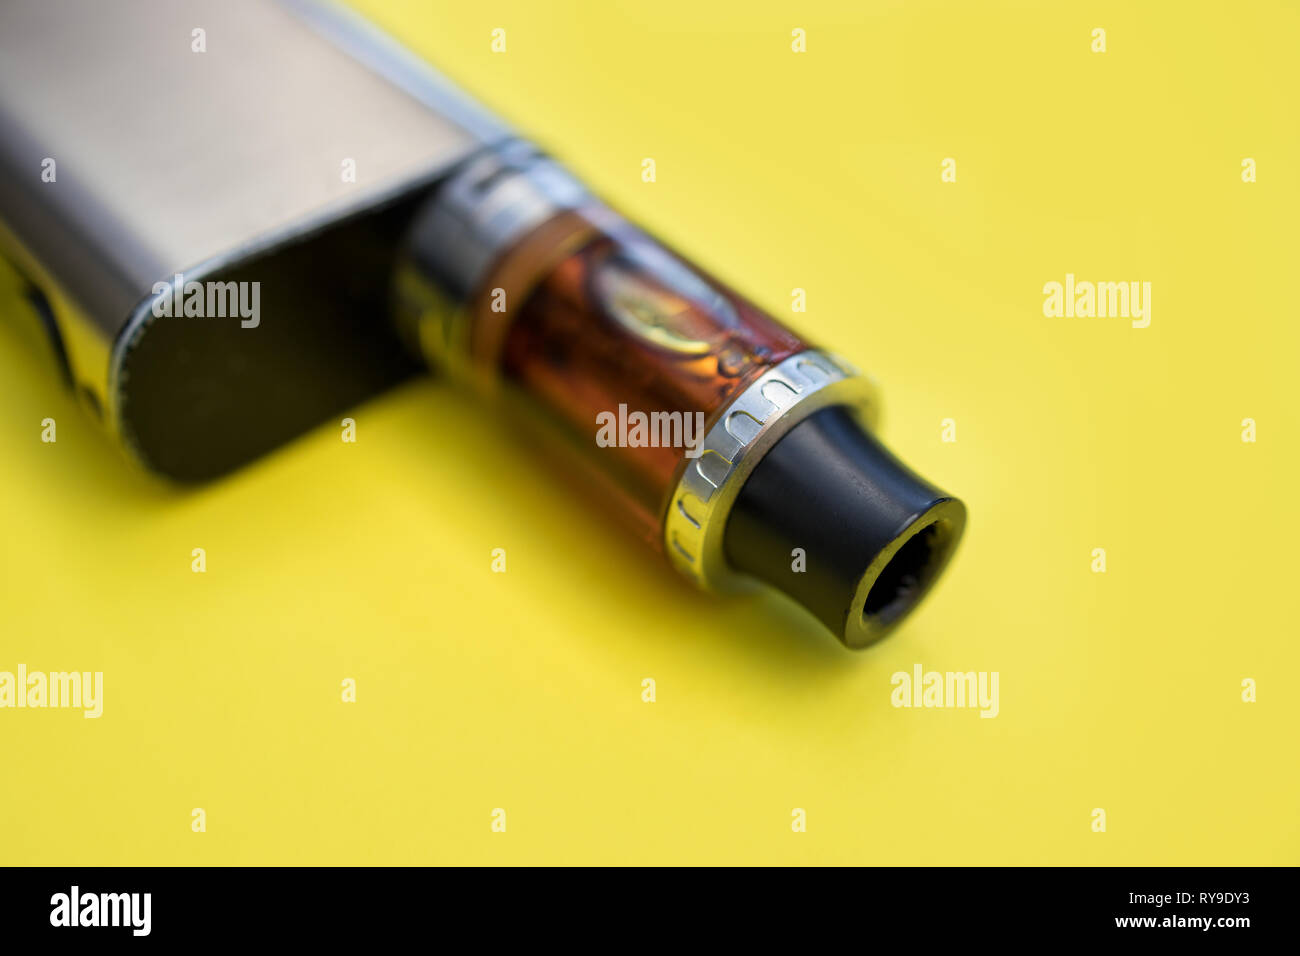 Vape Pen Metal Electronic Cigarette With Vaping Yellow Background Stock Photo Alamy